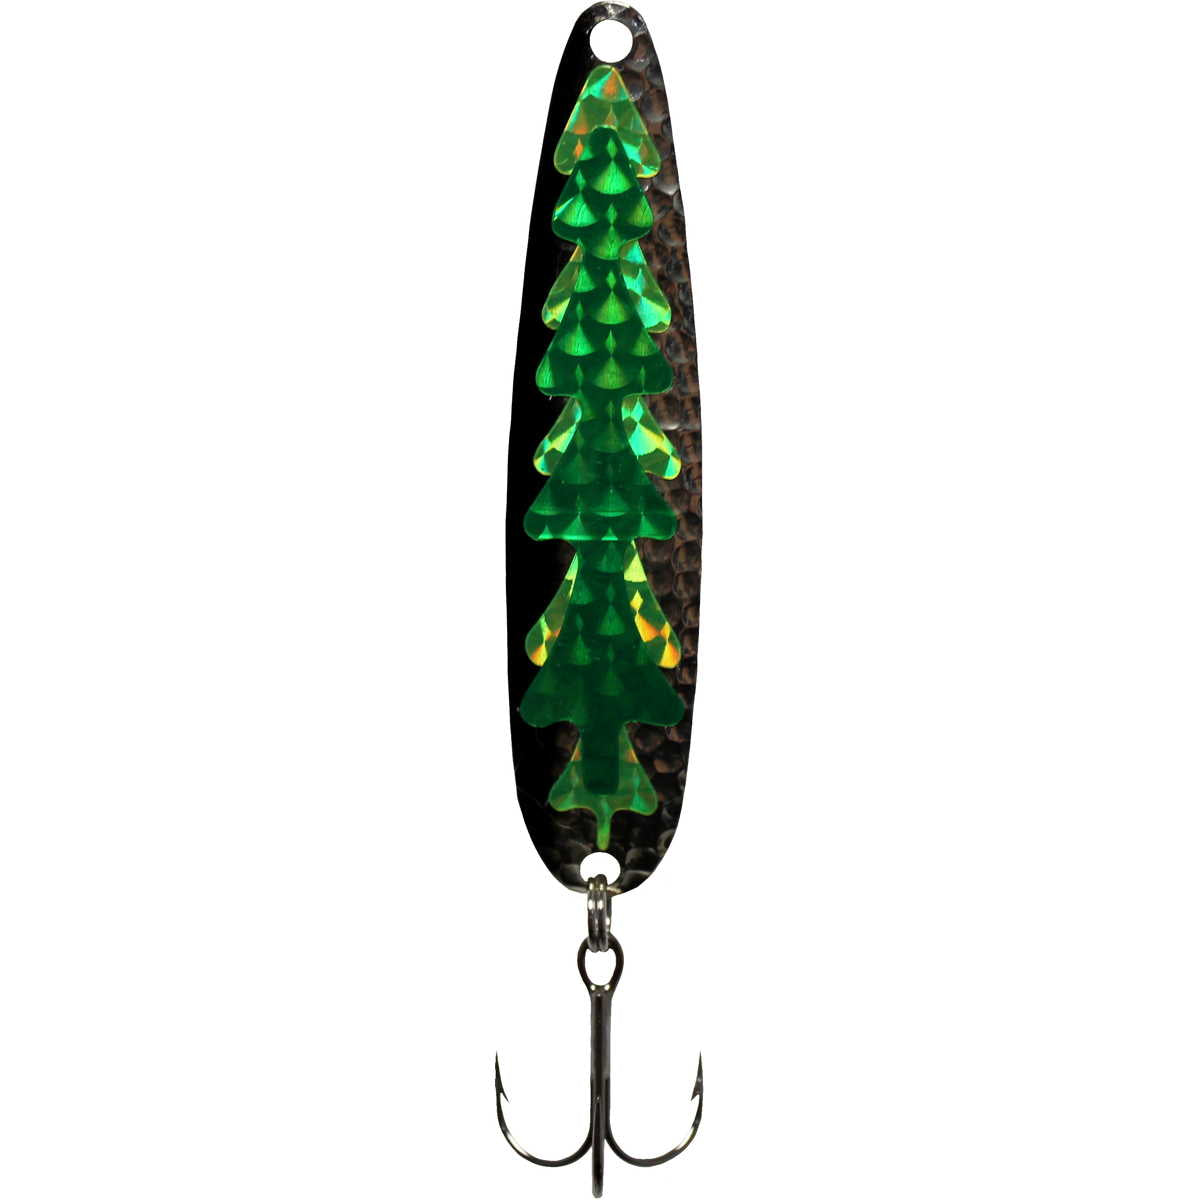 Photo of Advance Tackle Michigan Stinger Standard Spoon for sale at United Tackle Shops.